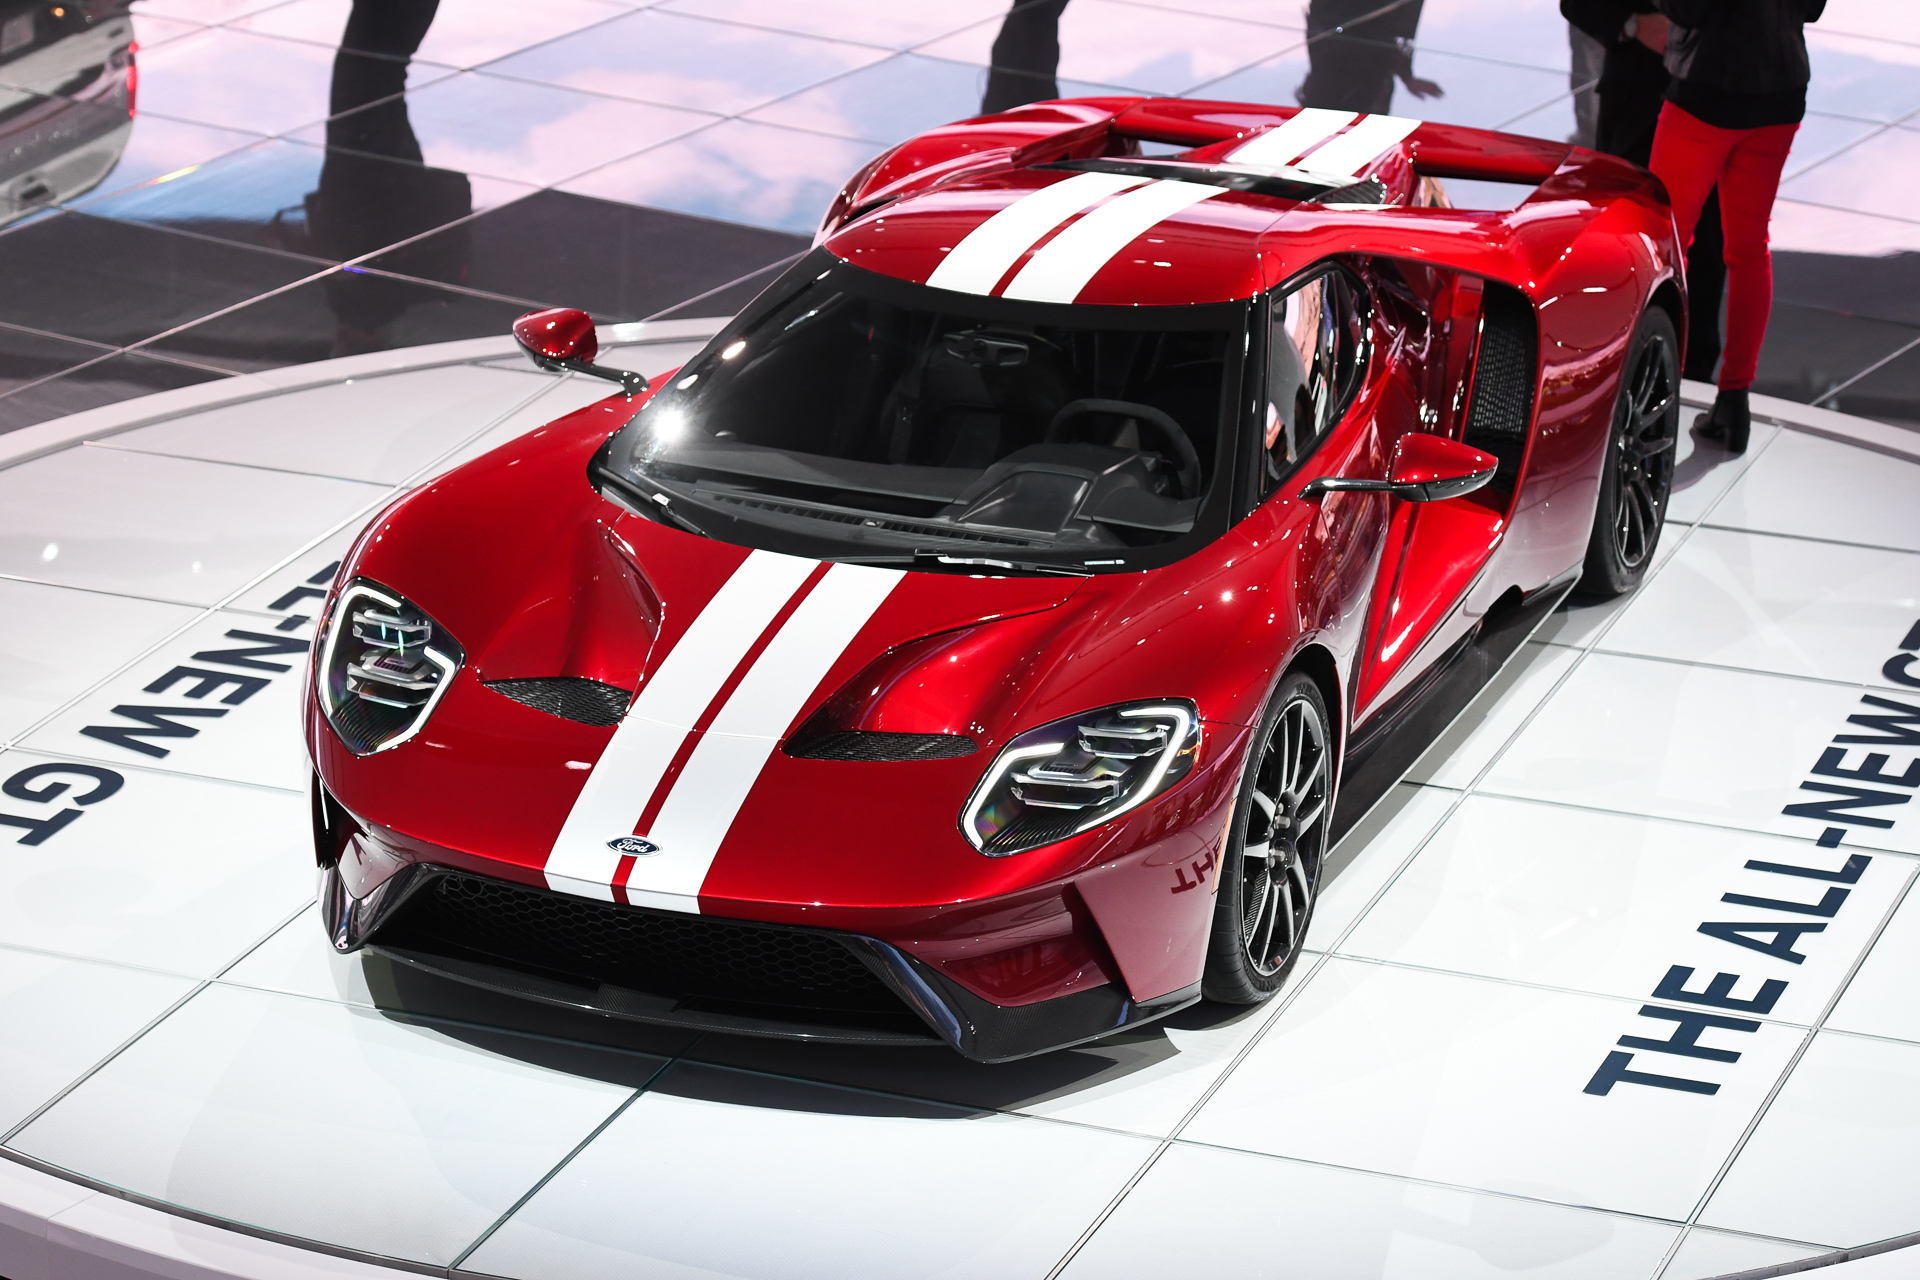 2017 Ford GT confirmed with 647 hp, 216 